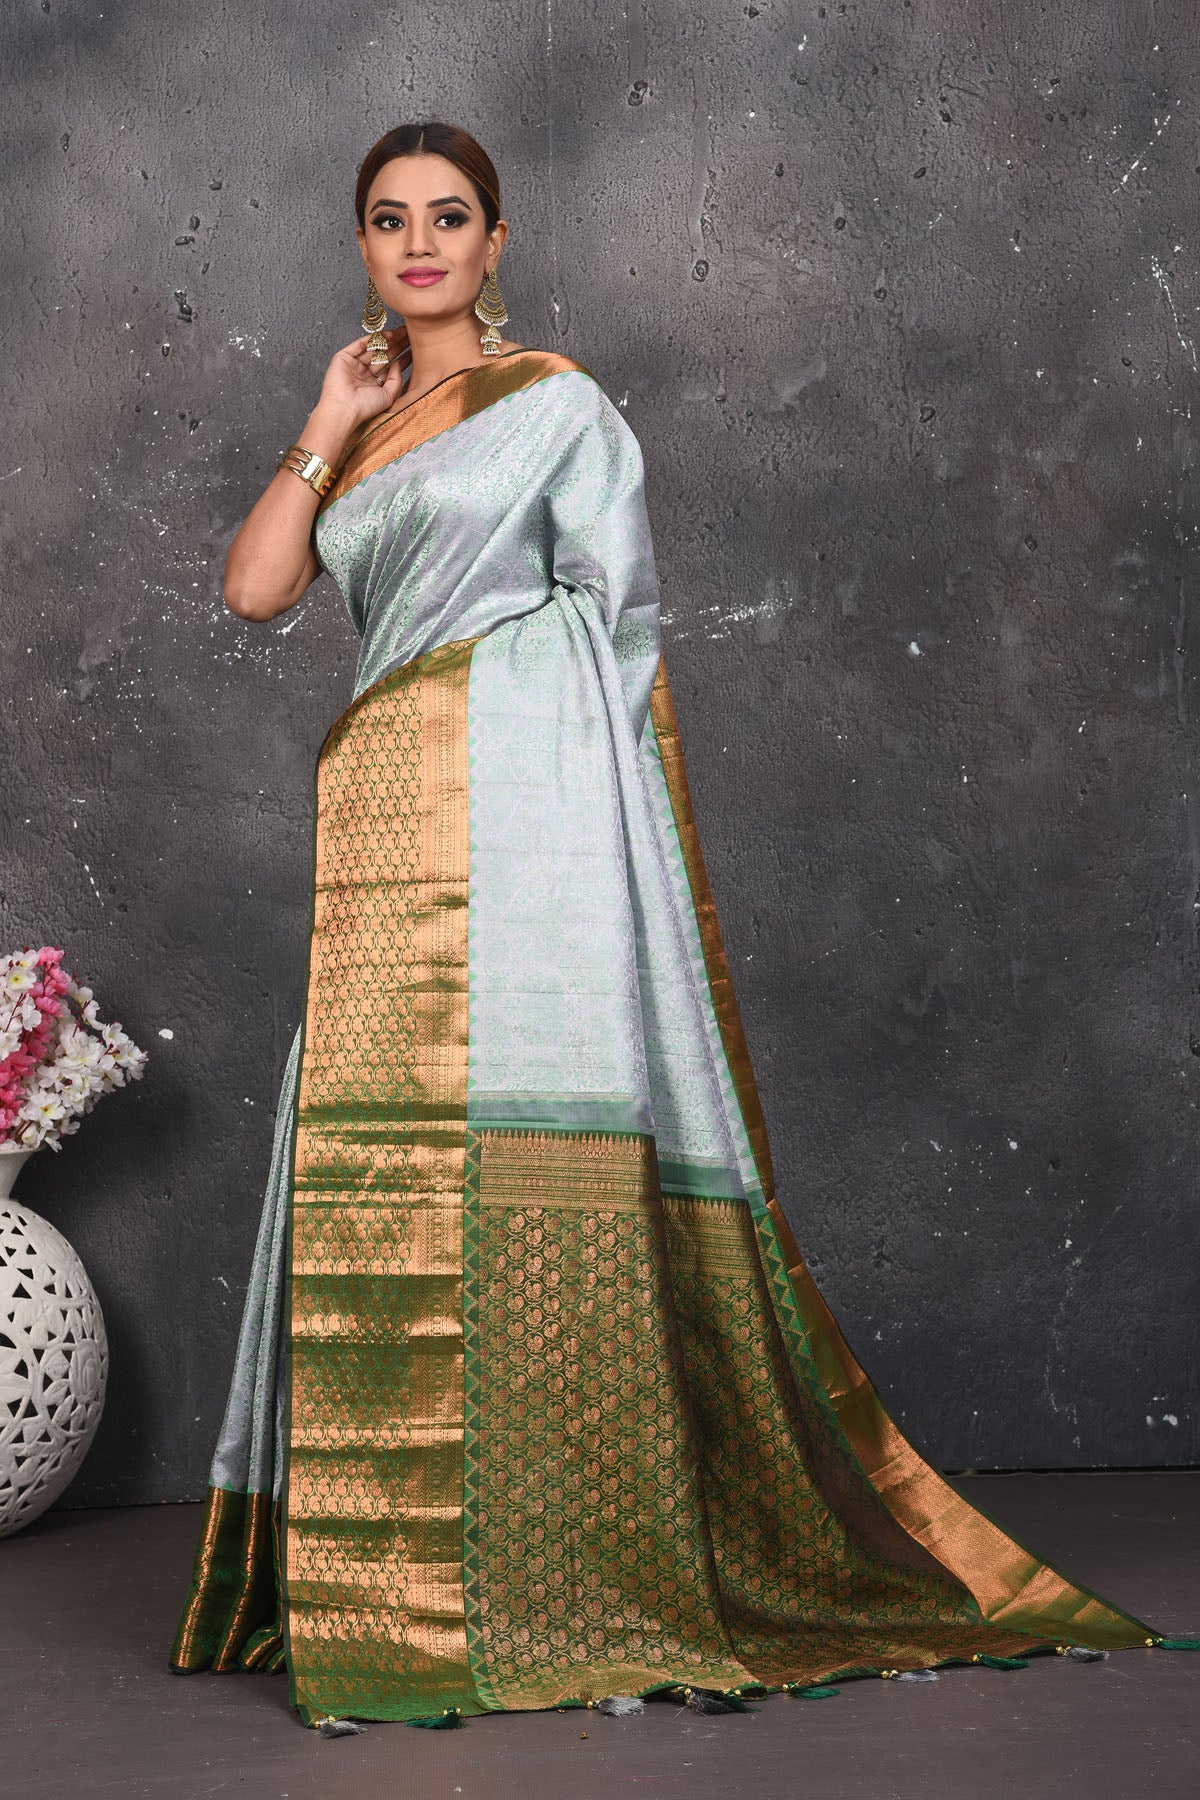 Buy beautiful handloom kanchipuram silk saree adorned with antique zari buta work online in USA which has crafted by skilled weaver with elegance and grace, this saree is definitely the epitome of beauty and a must have in your collection. Buy designer handwoven kanchipuram sari with any blouse from Pure Elegance Indian saree store in USA.- Full view.